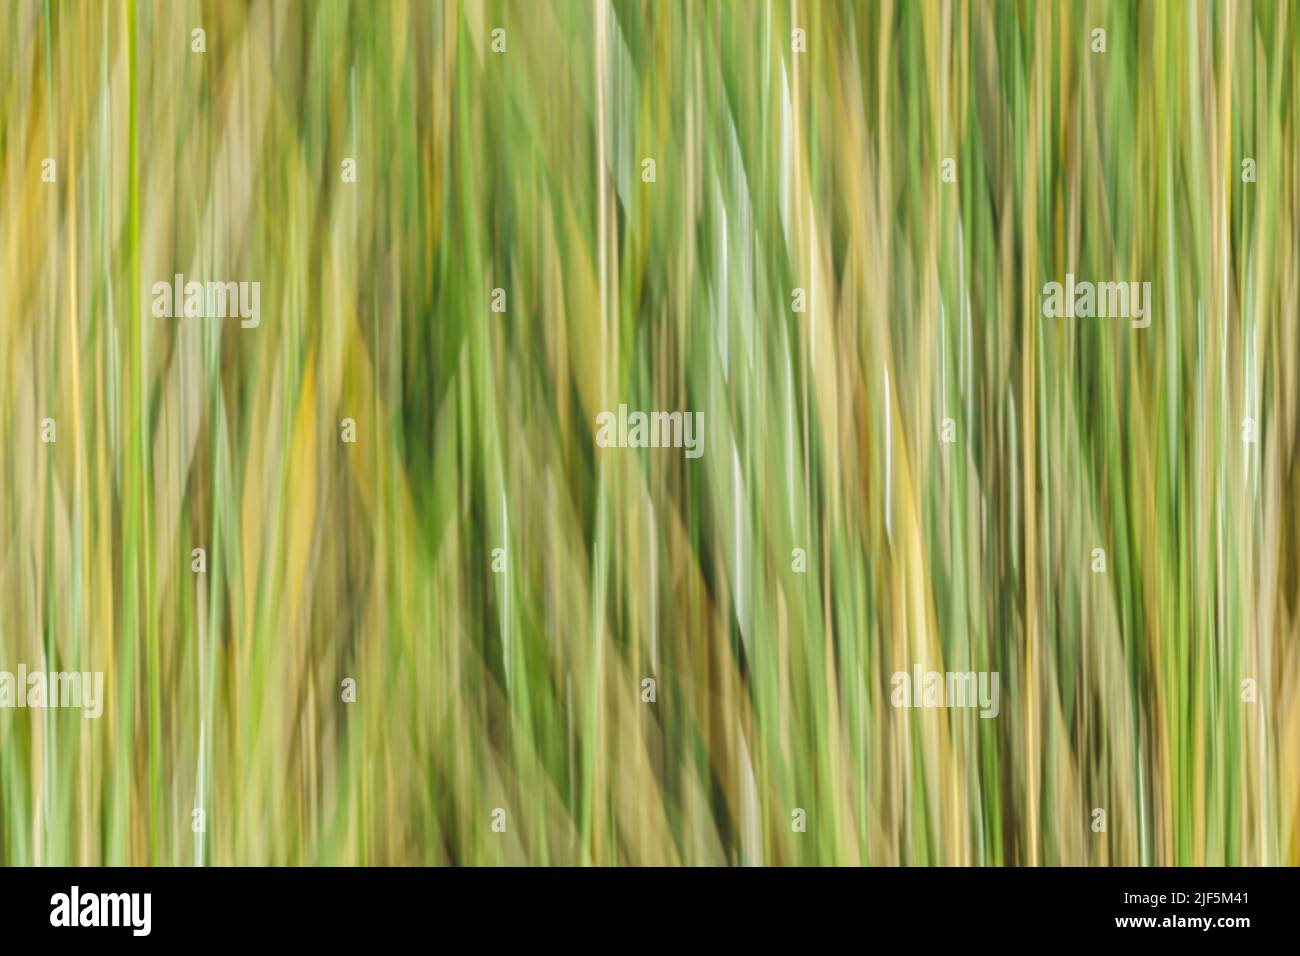 Abstract patterns of nature in wetland vegetation green reeds close-up. Stock Photo